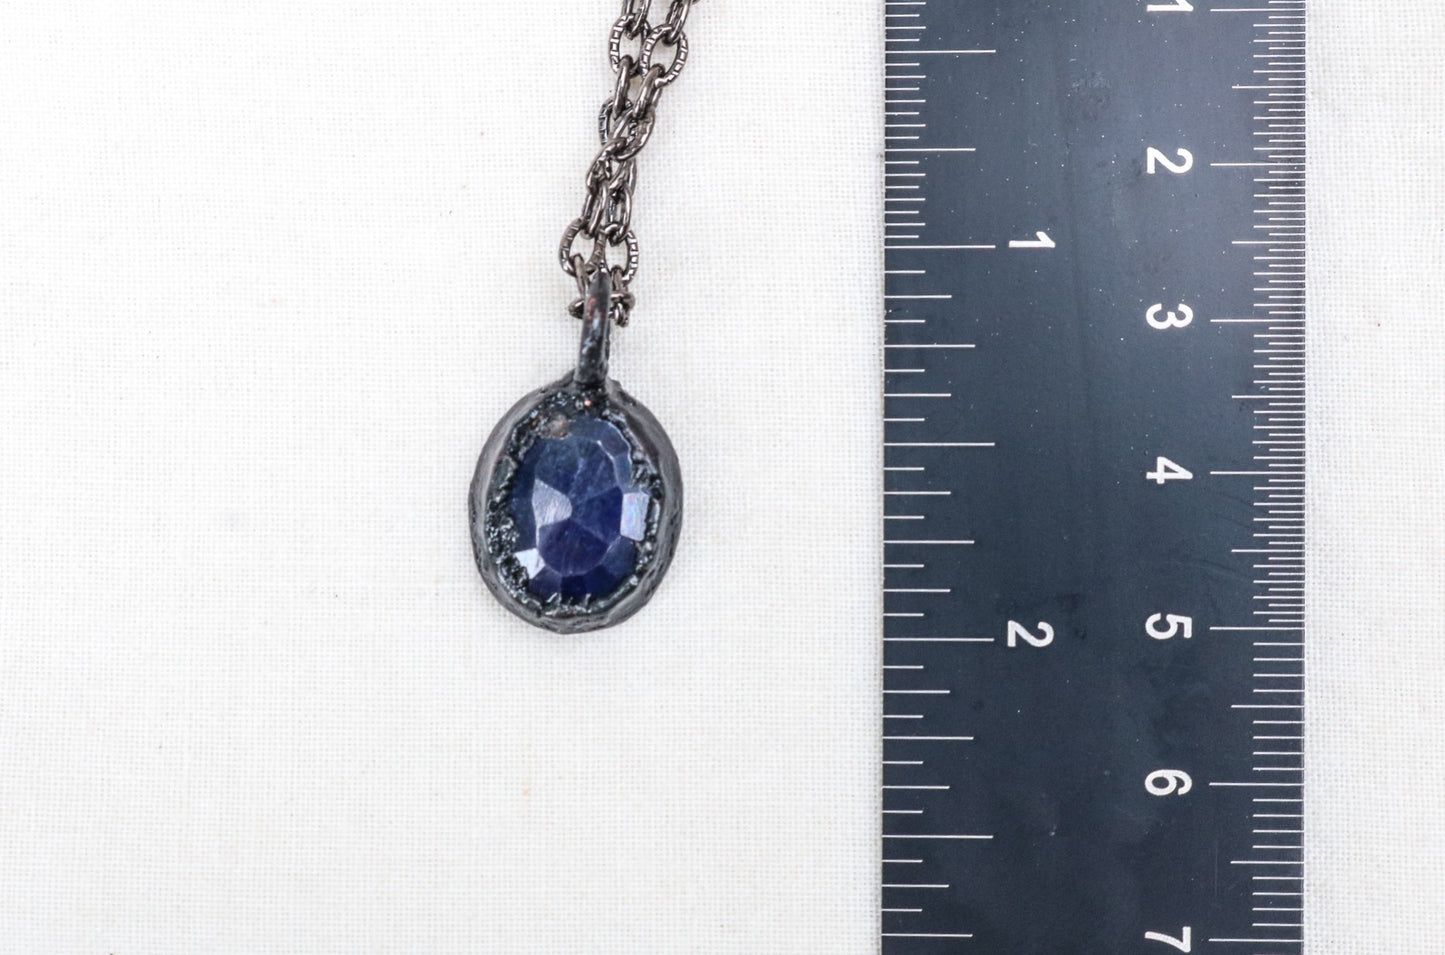 Sapphire Necklace (Faceted)